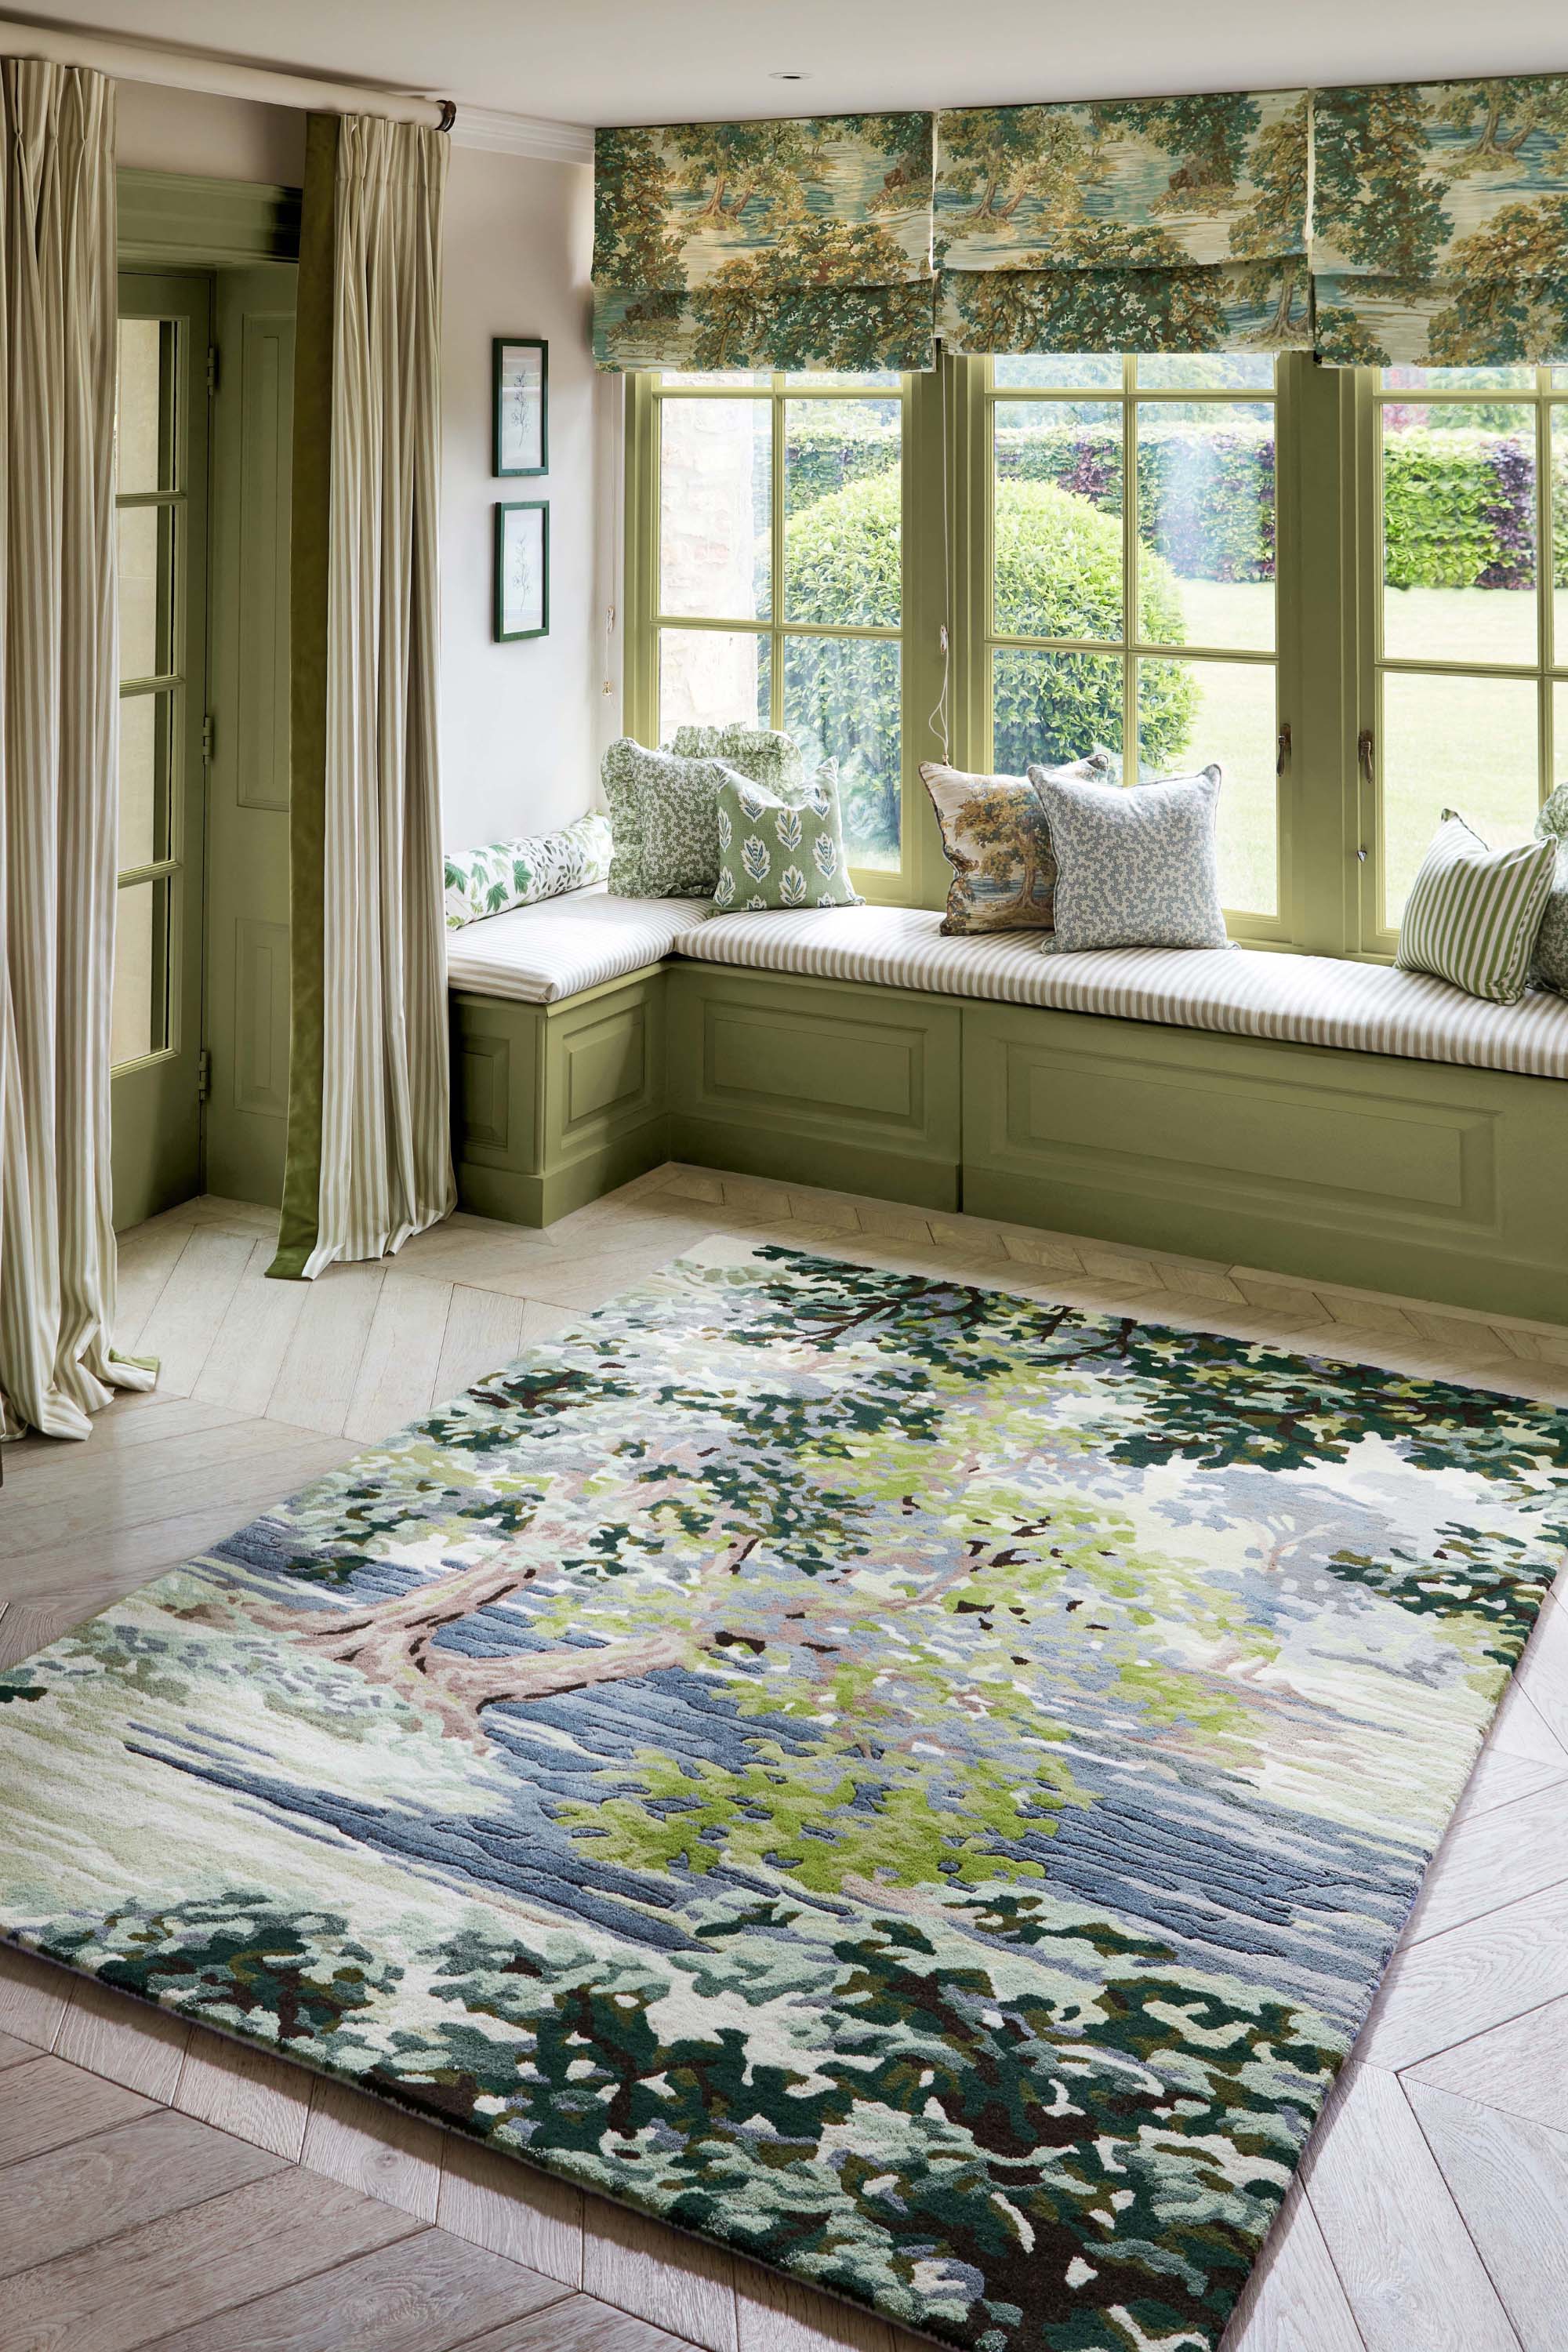 Green and blue floral rug with waterside pattern